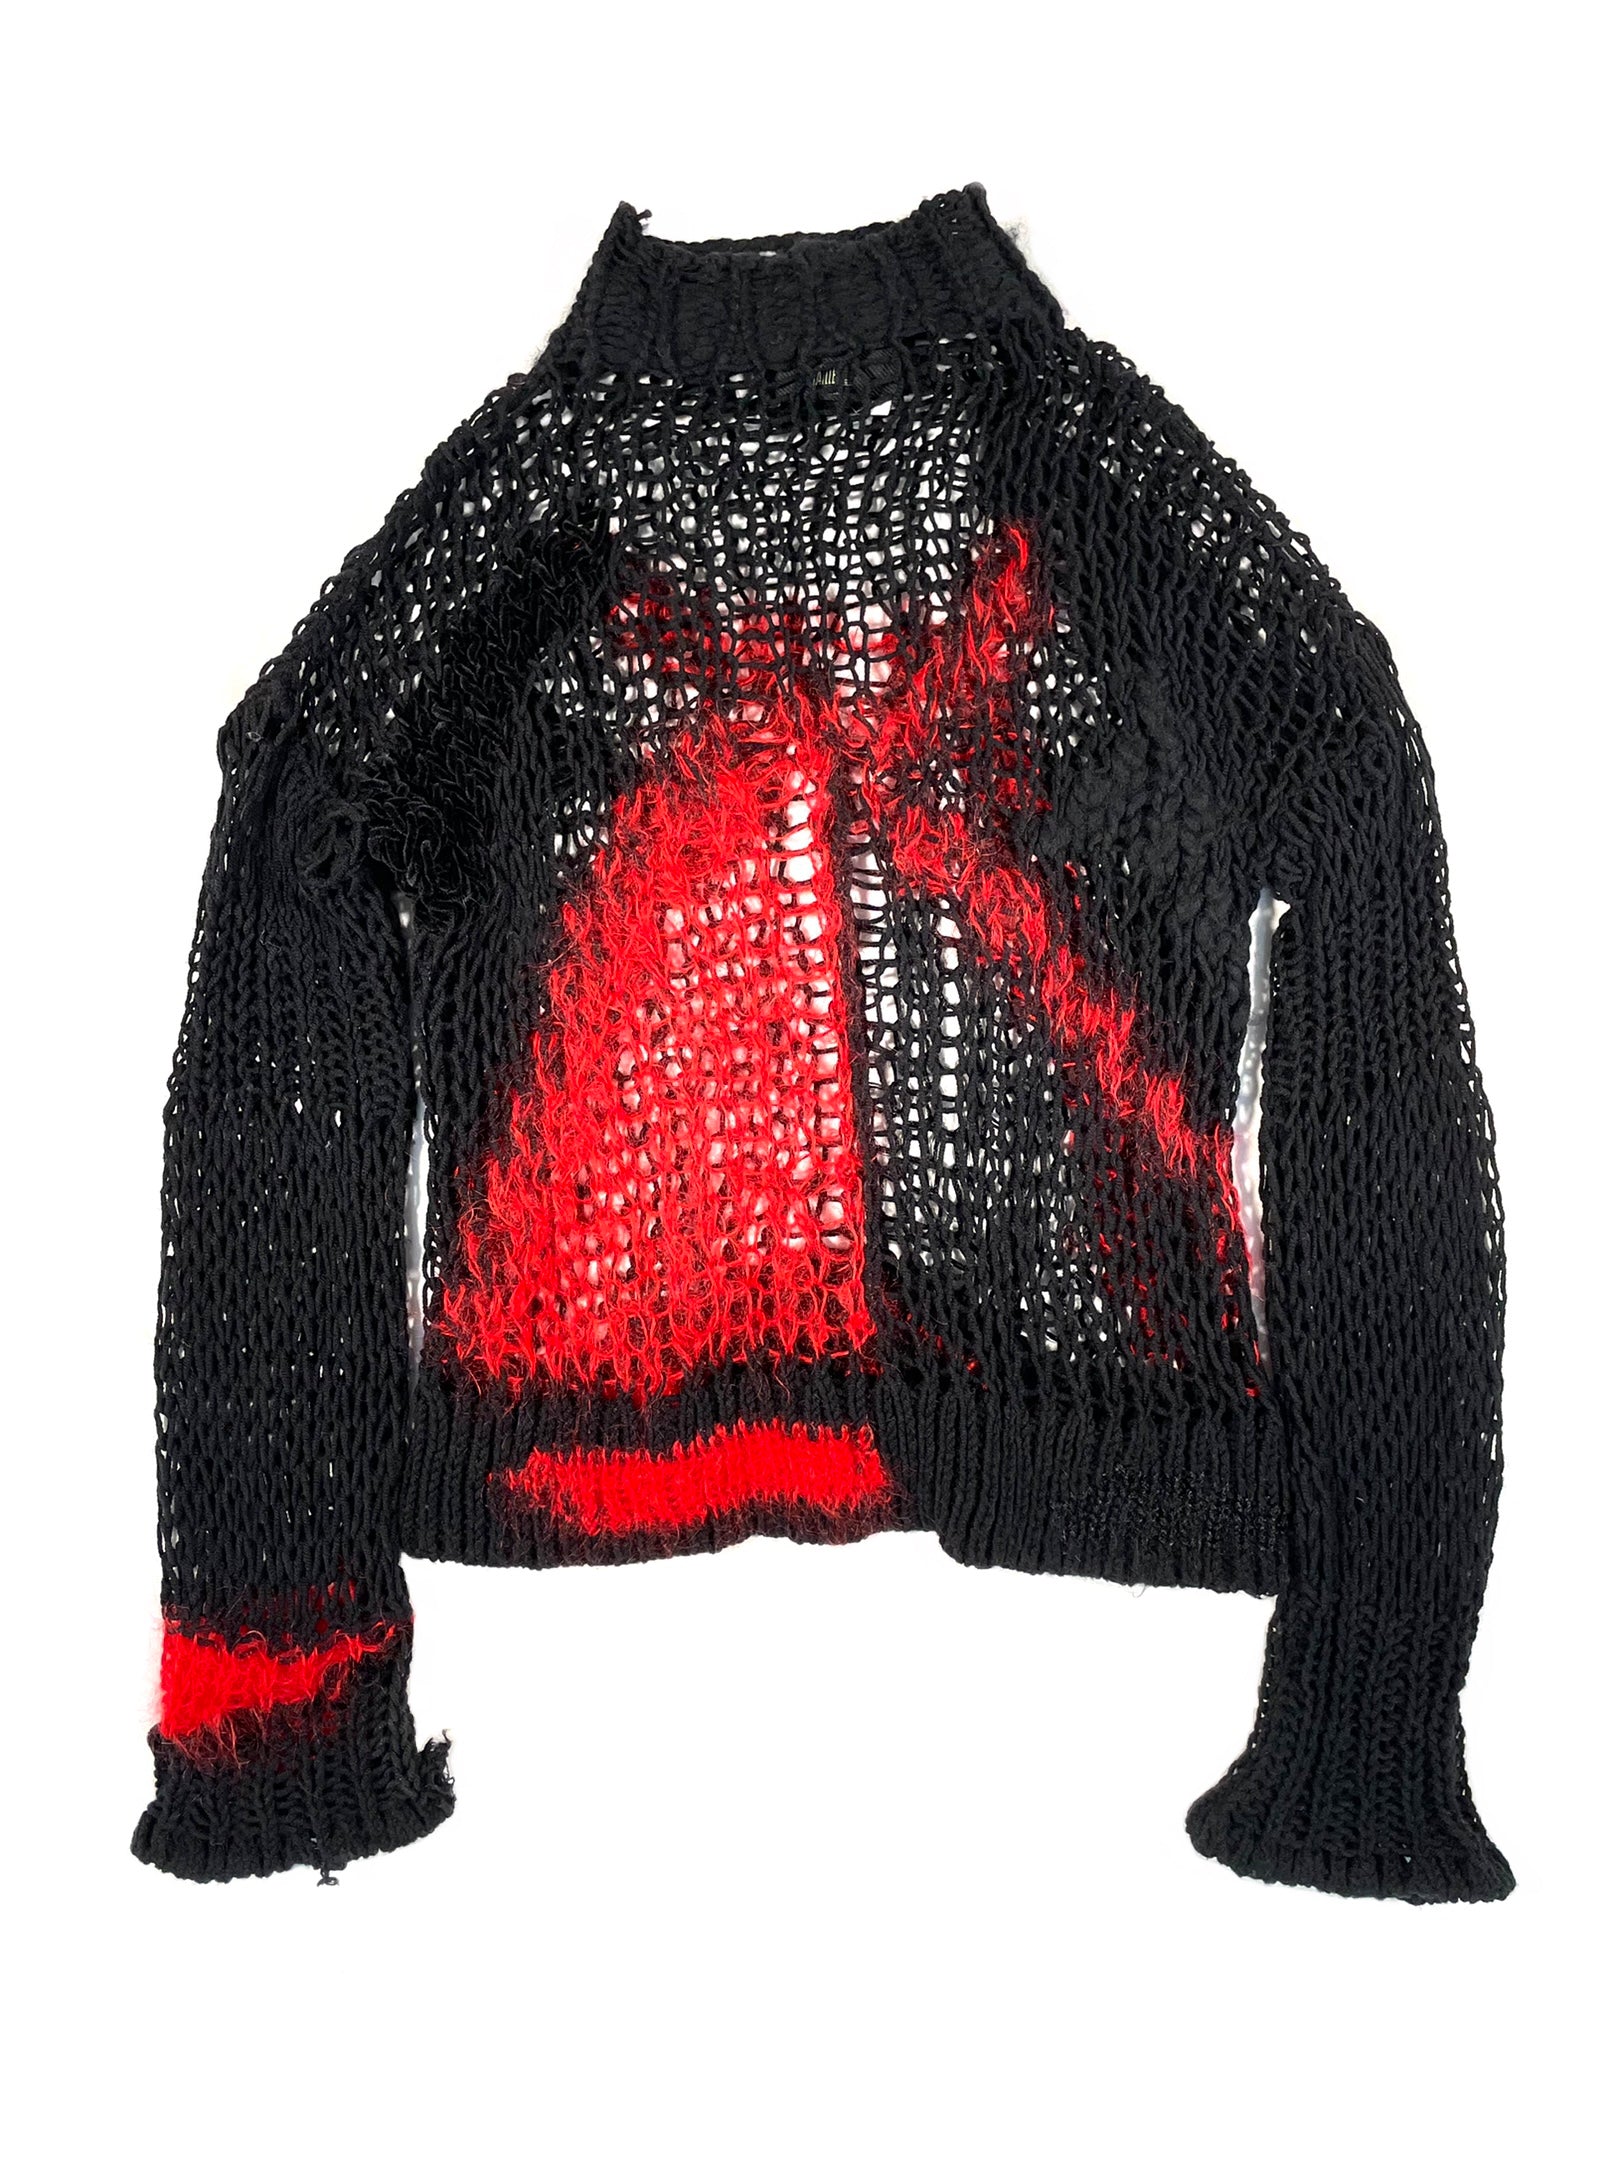 FW2007 Jean Paul Gaultier mohair knit sweater – elevated archives